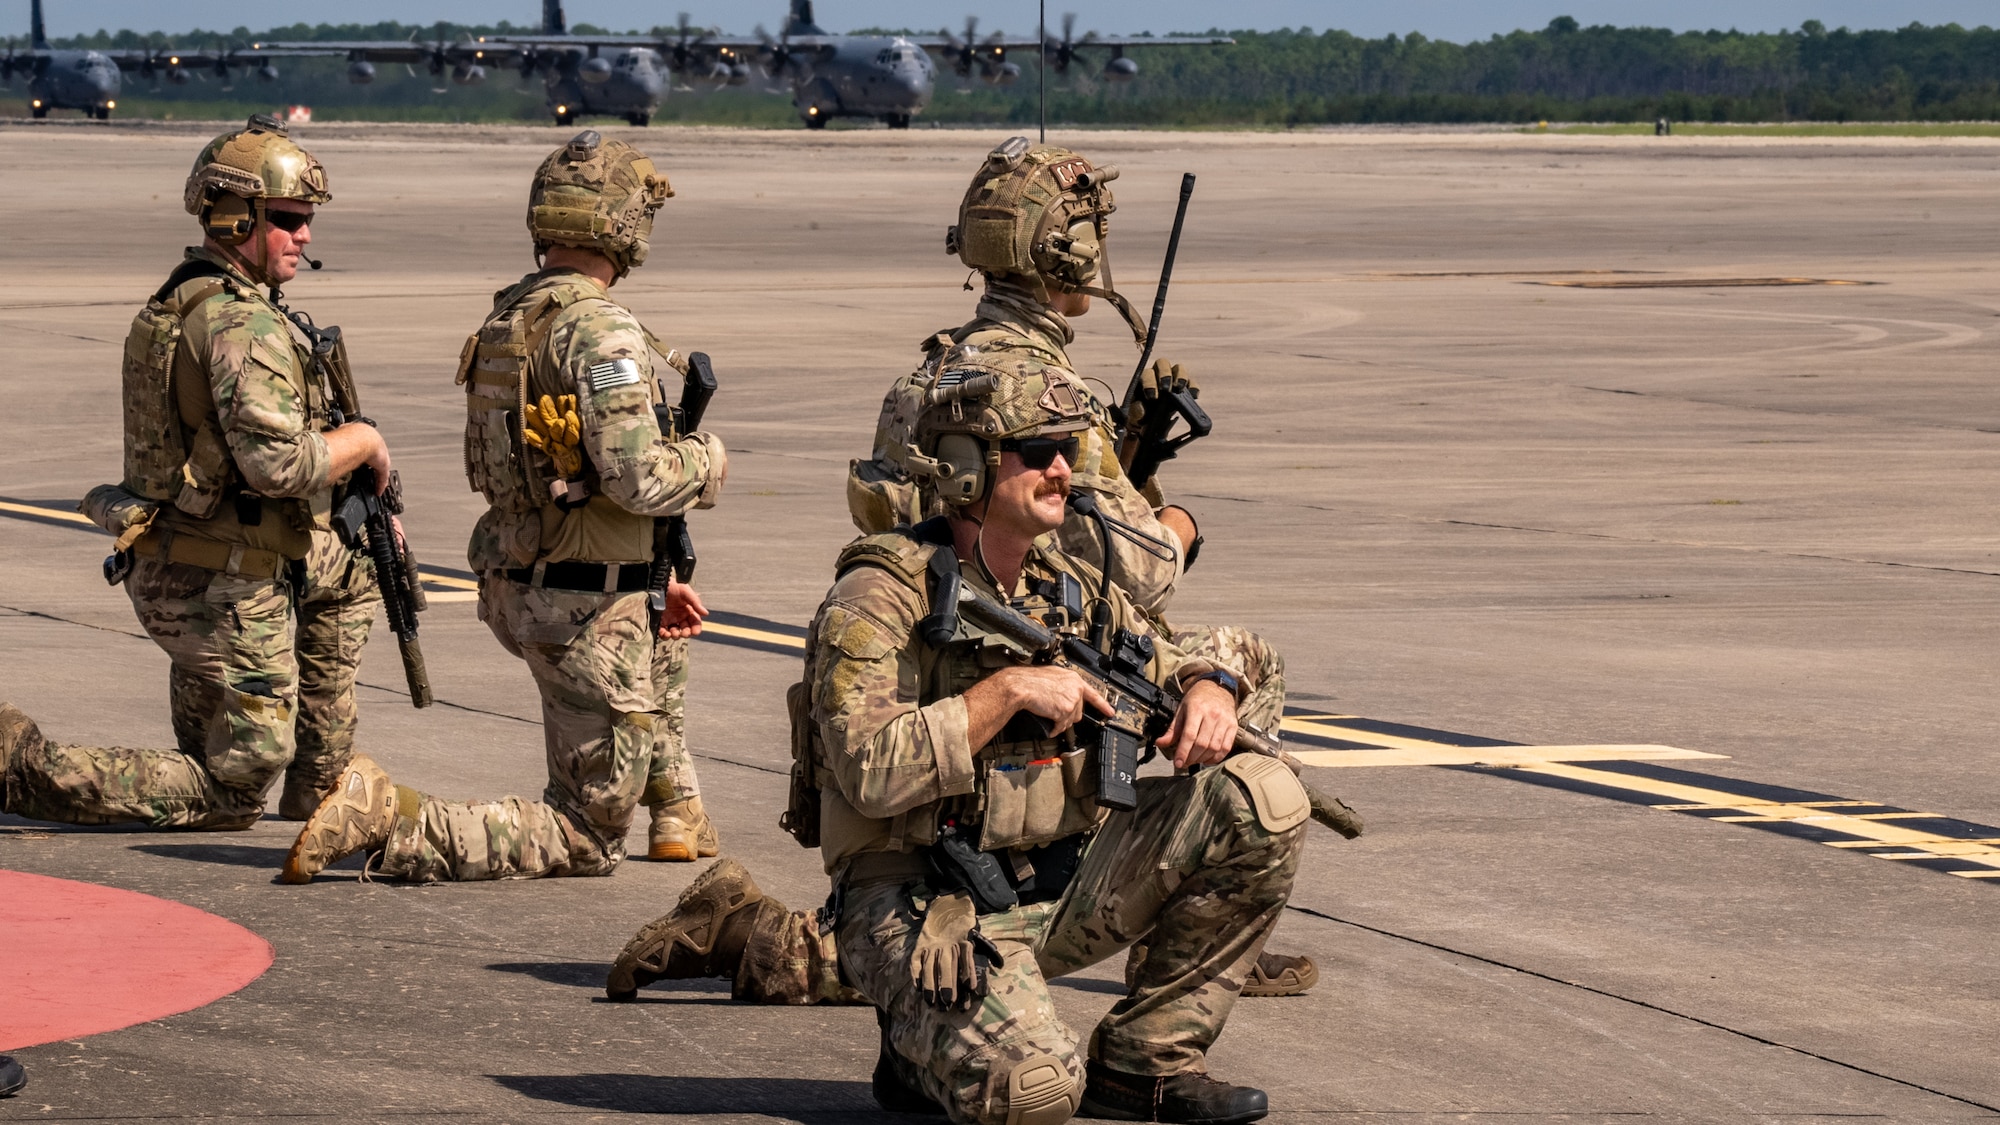 Air Commandos assigned to the 21st Special Tactics Squadron participate in an airfield establishment exercise at Hurlburt Field, Florida, Sept. 21, 2023. Members of the 21st STS jumped from an MC-130J to conduct the airfield establishment exercise during the 94th Joint Civilian Orientation Conference at Hurlburt Field. (U.S. Air Force photo by Airman 1st Class Hussein Enaya)